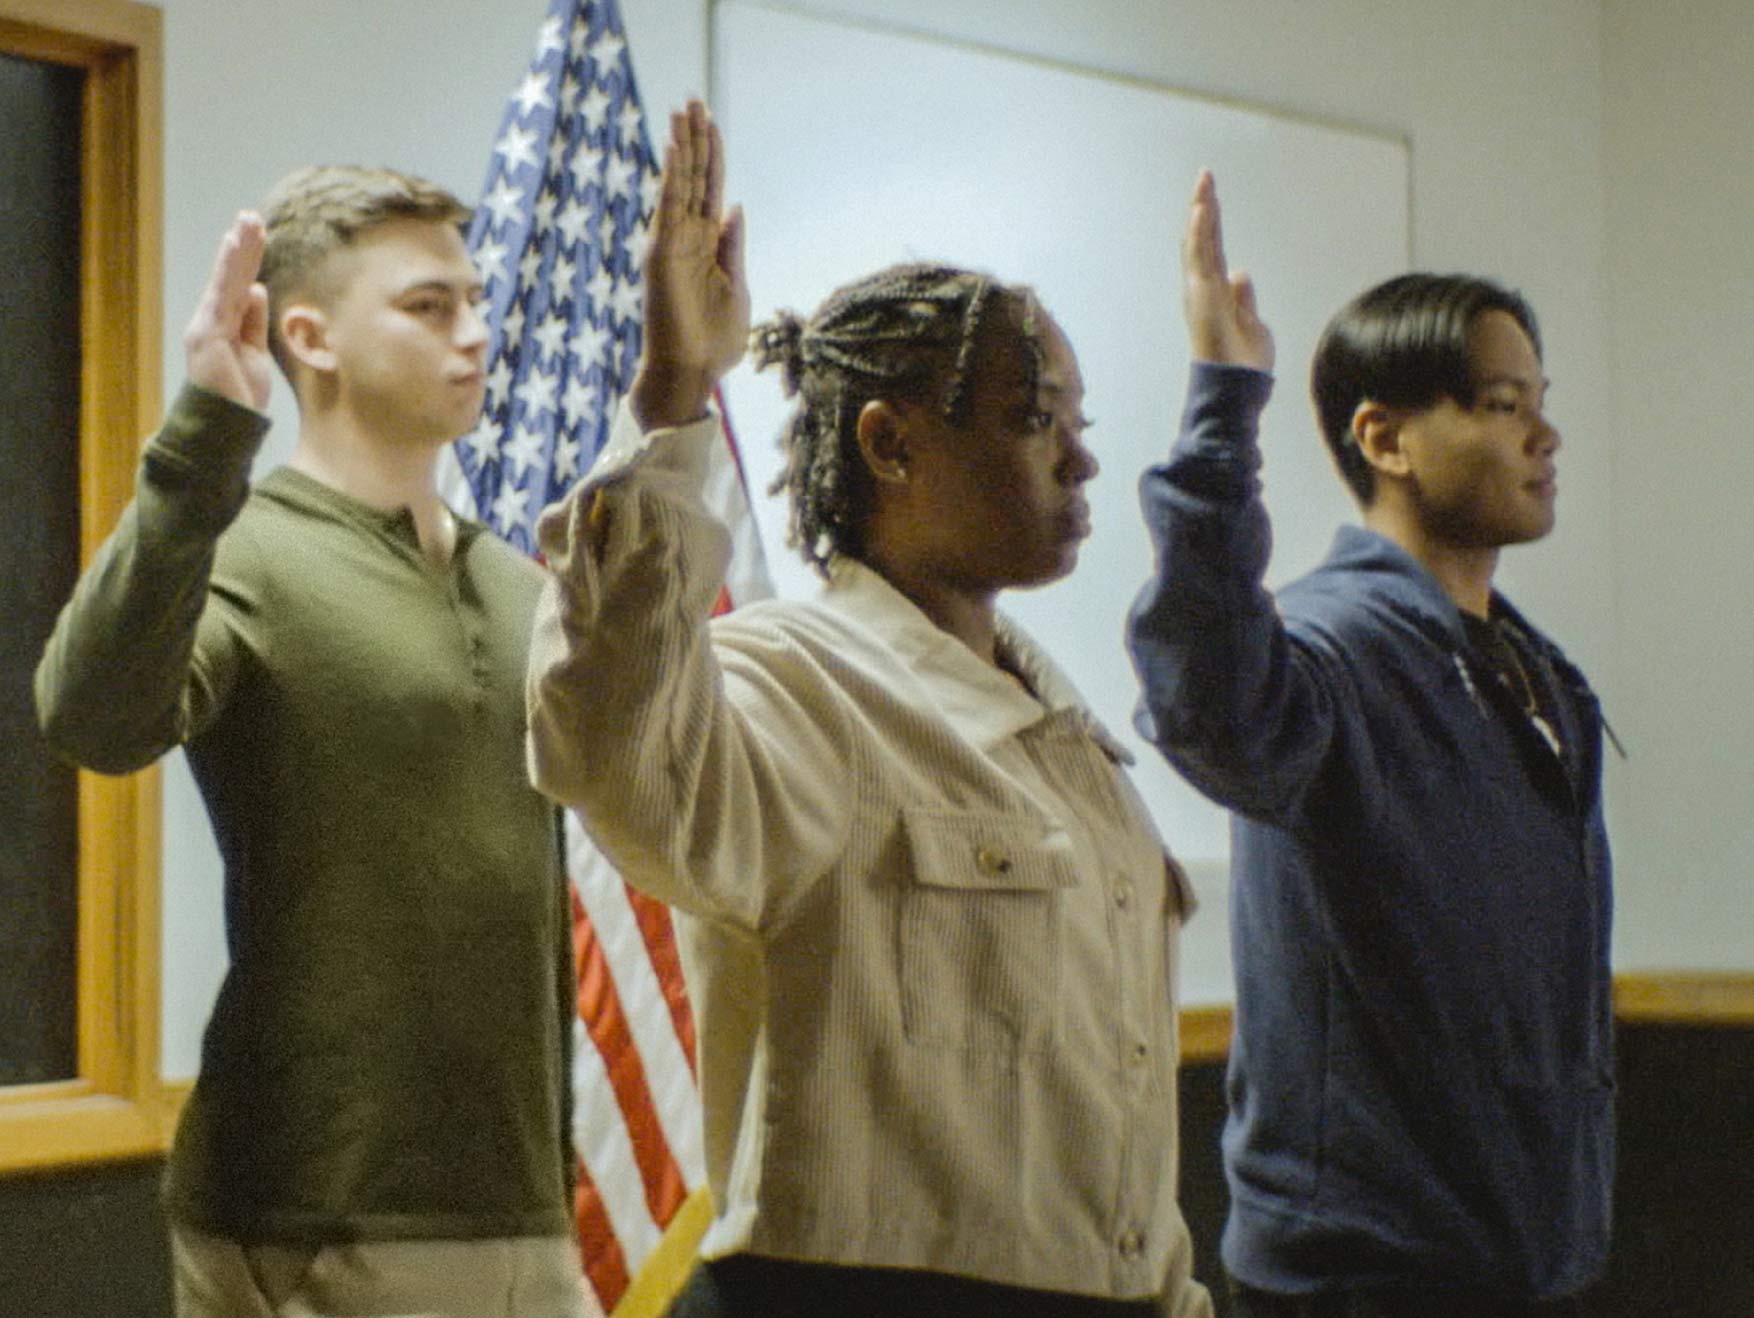 Three recruits raising their arm and taking the Oath of Enlistment